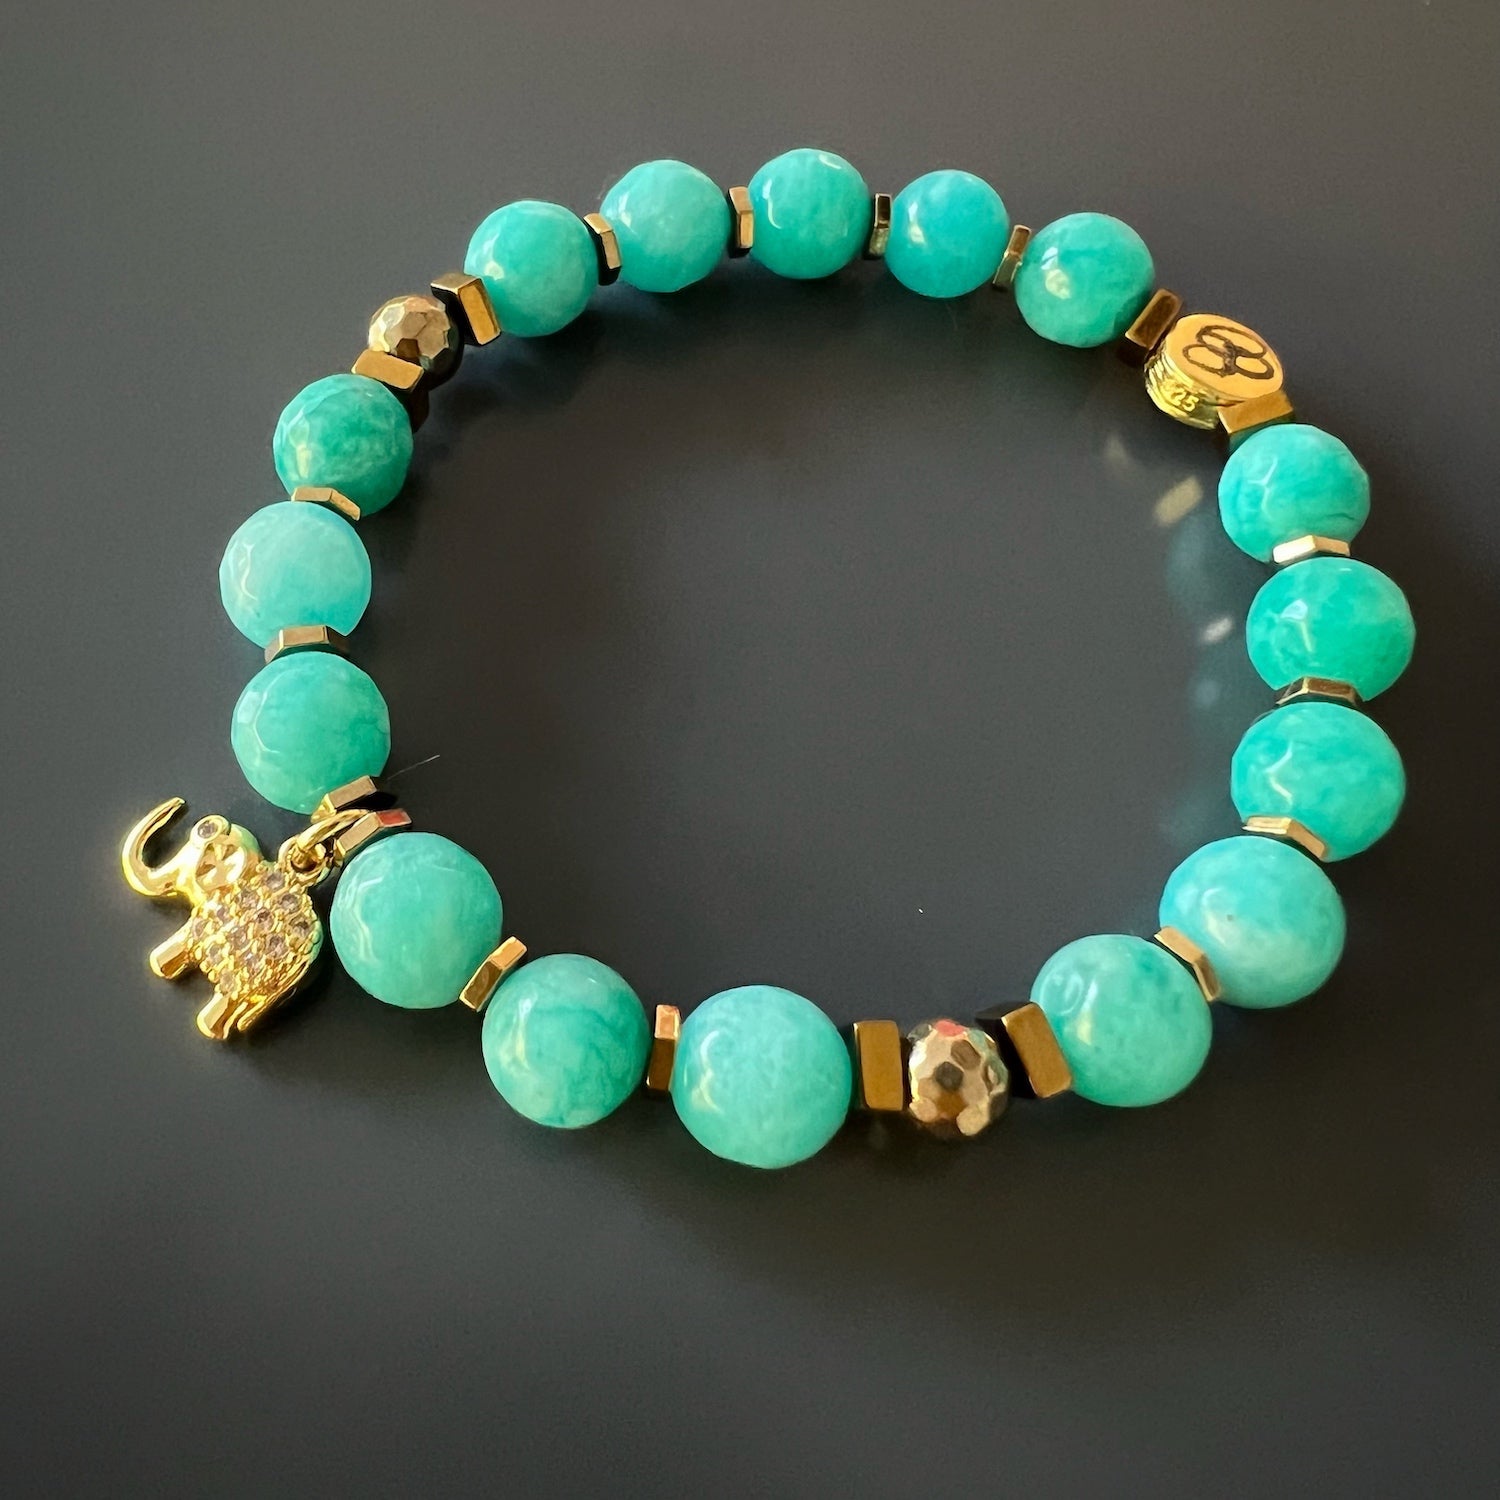 Elevate your style with the elegant combination of Amazonite and gold-tone accents